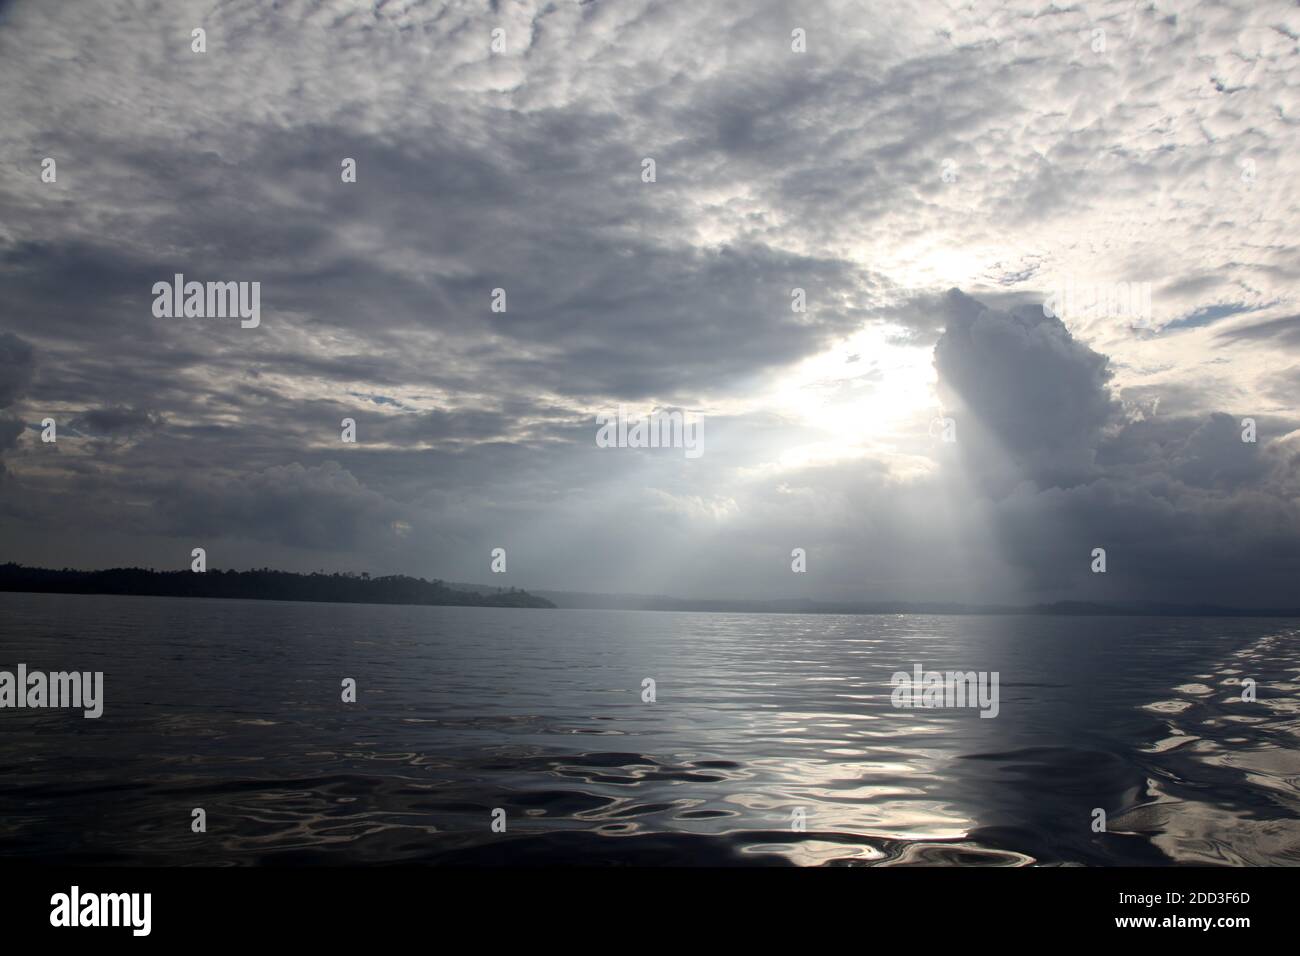 The sun peers through storm clouds on a still afternoon in the Mentawai Islands - Indonesia Stock Photo